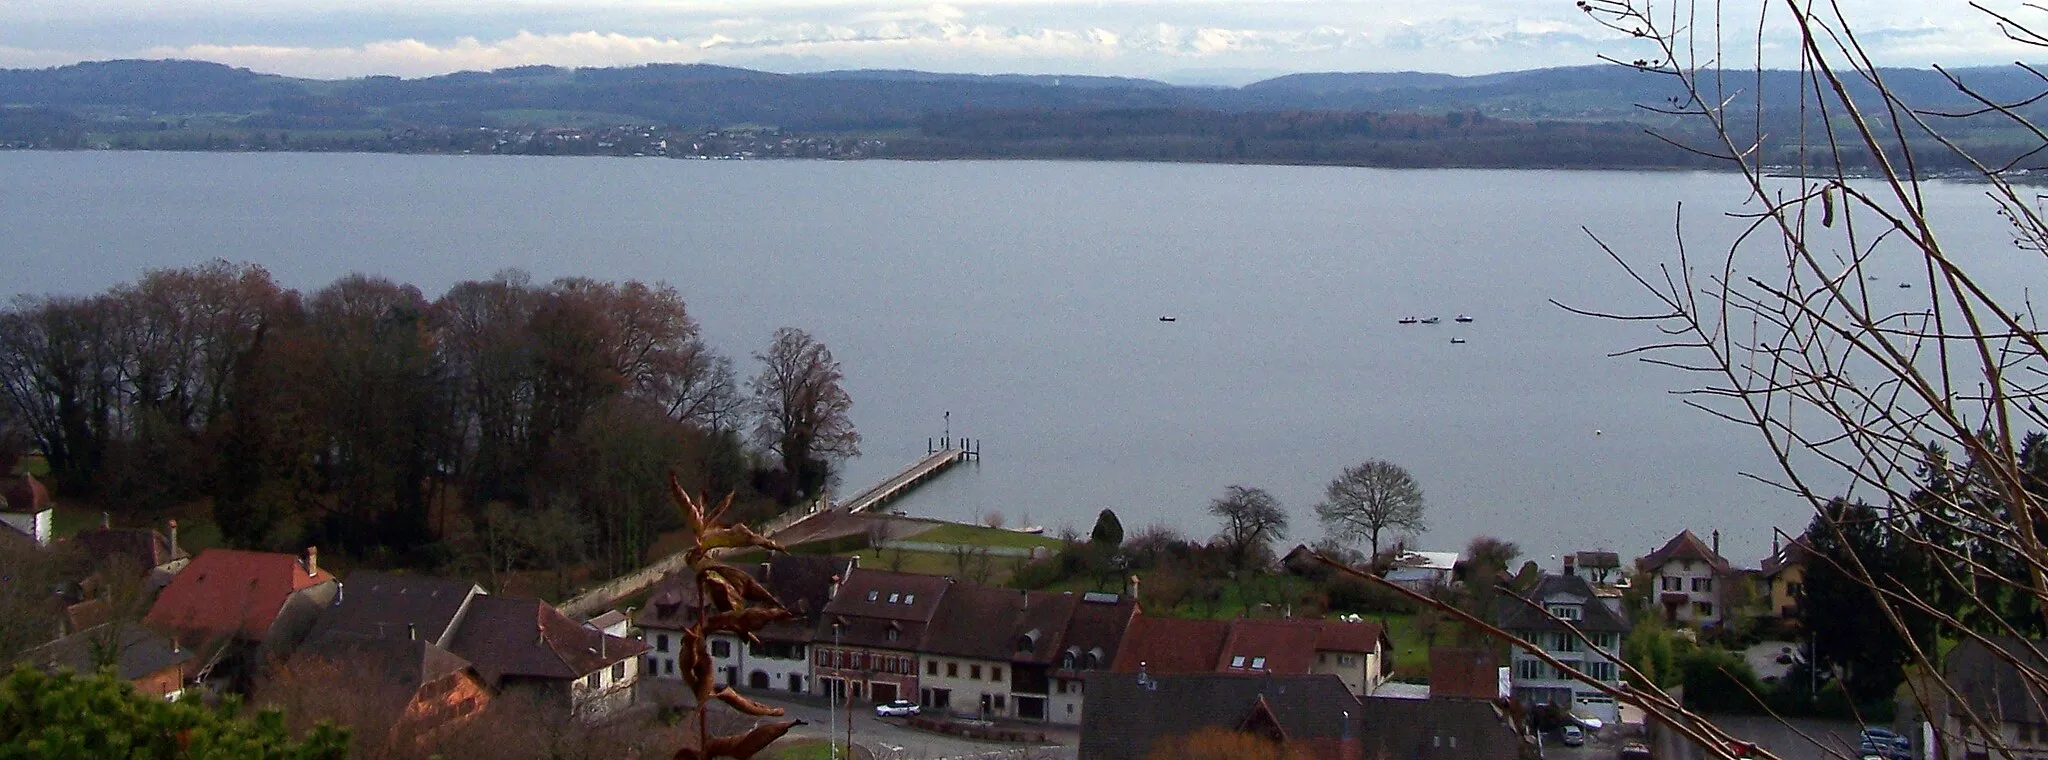 Photo showing: Pictures of the Vallamand-Dessous pier, on the lake of Morat (Murten), Canton of Vaud, Switzerland